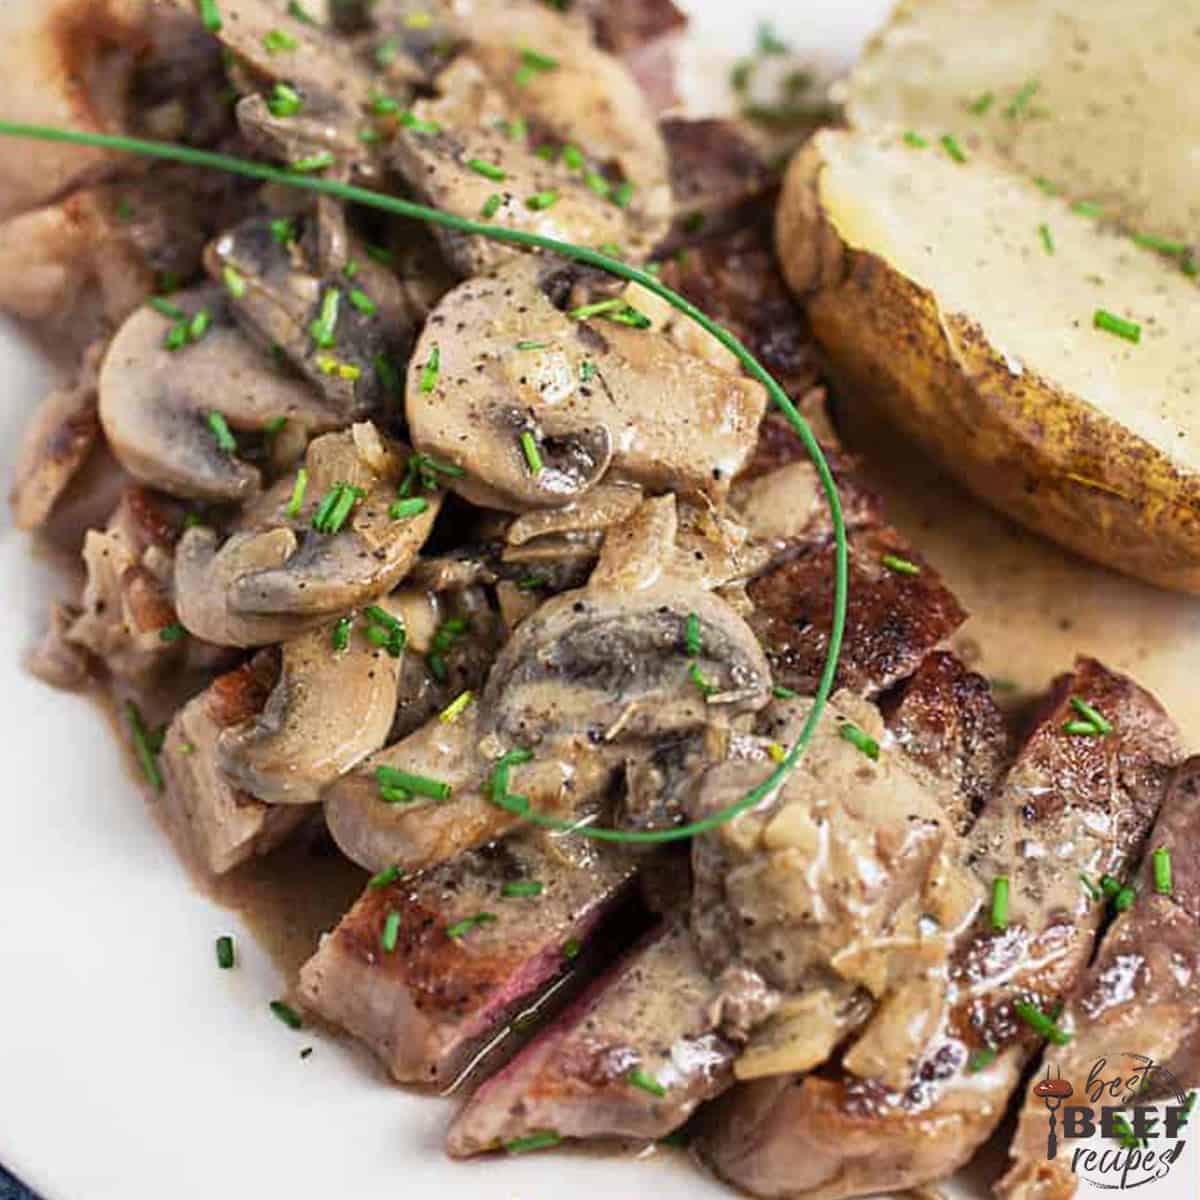 Steak Diane on a plate with potato